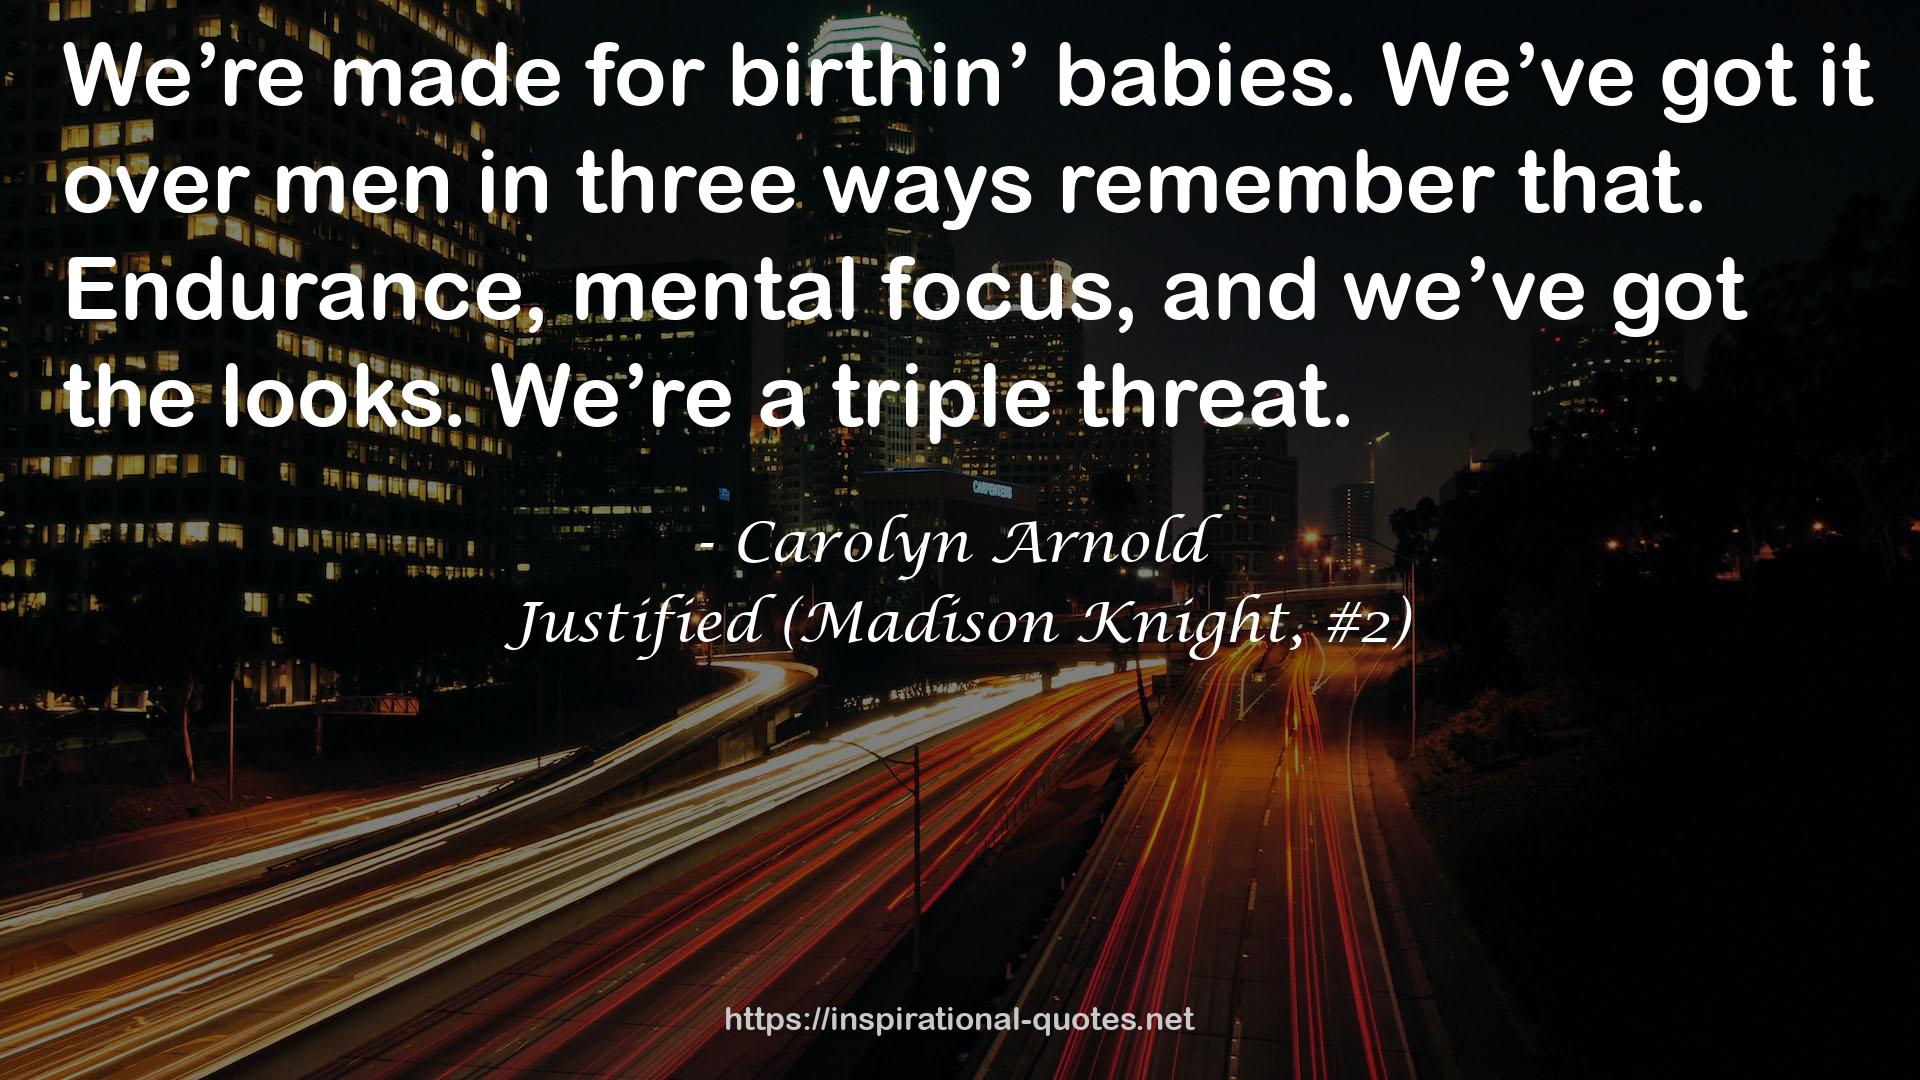 Justified (Madison Knight, #2) QUOTES